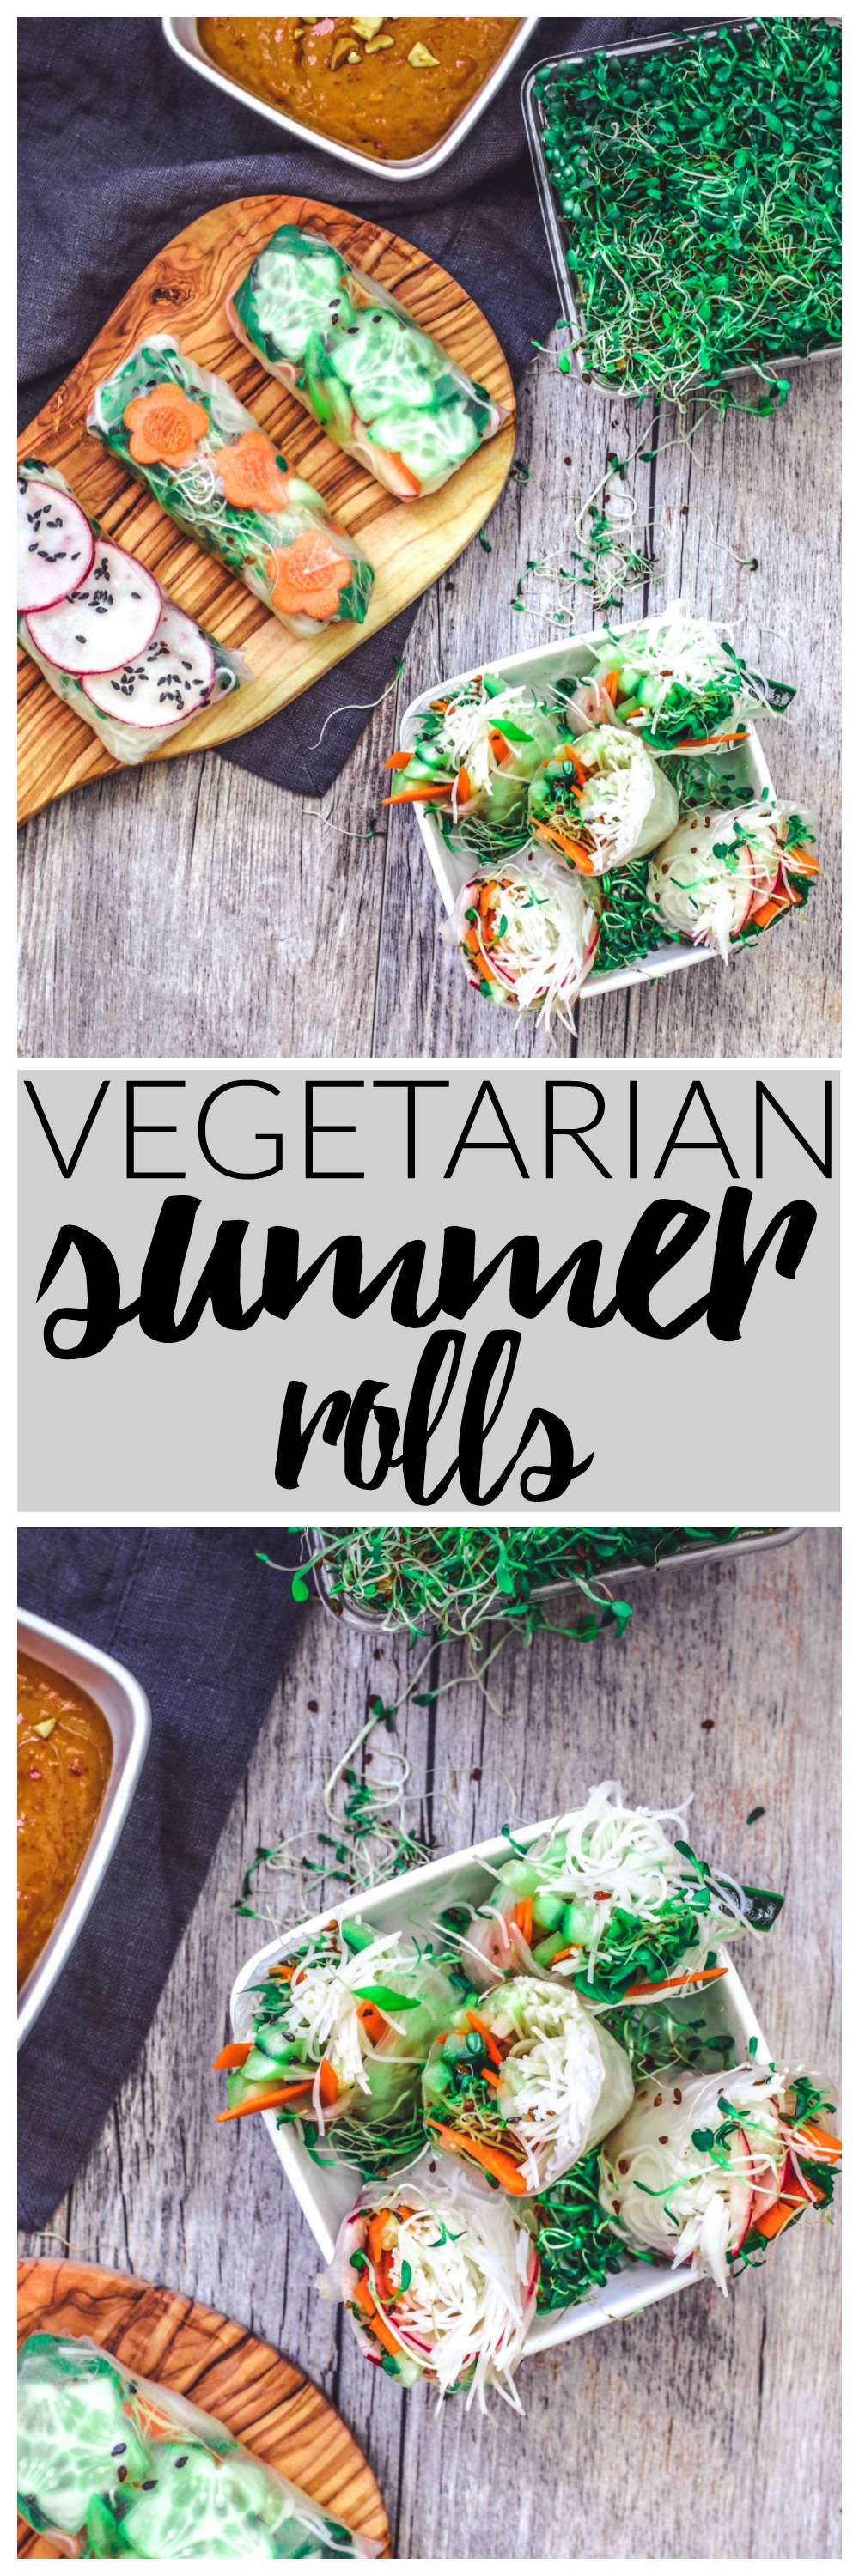 Vegetarian Summer Rolls With Spicy Peanut Sauce | Killing Thyme — These refreshing AF summer rolls are full of crisp veggies and are especially delish when dunked into spicy peanut sauce!